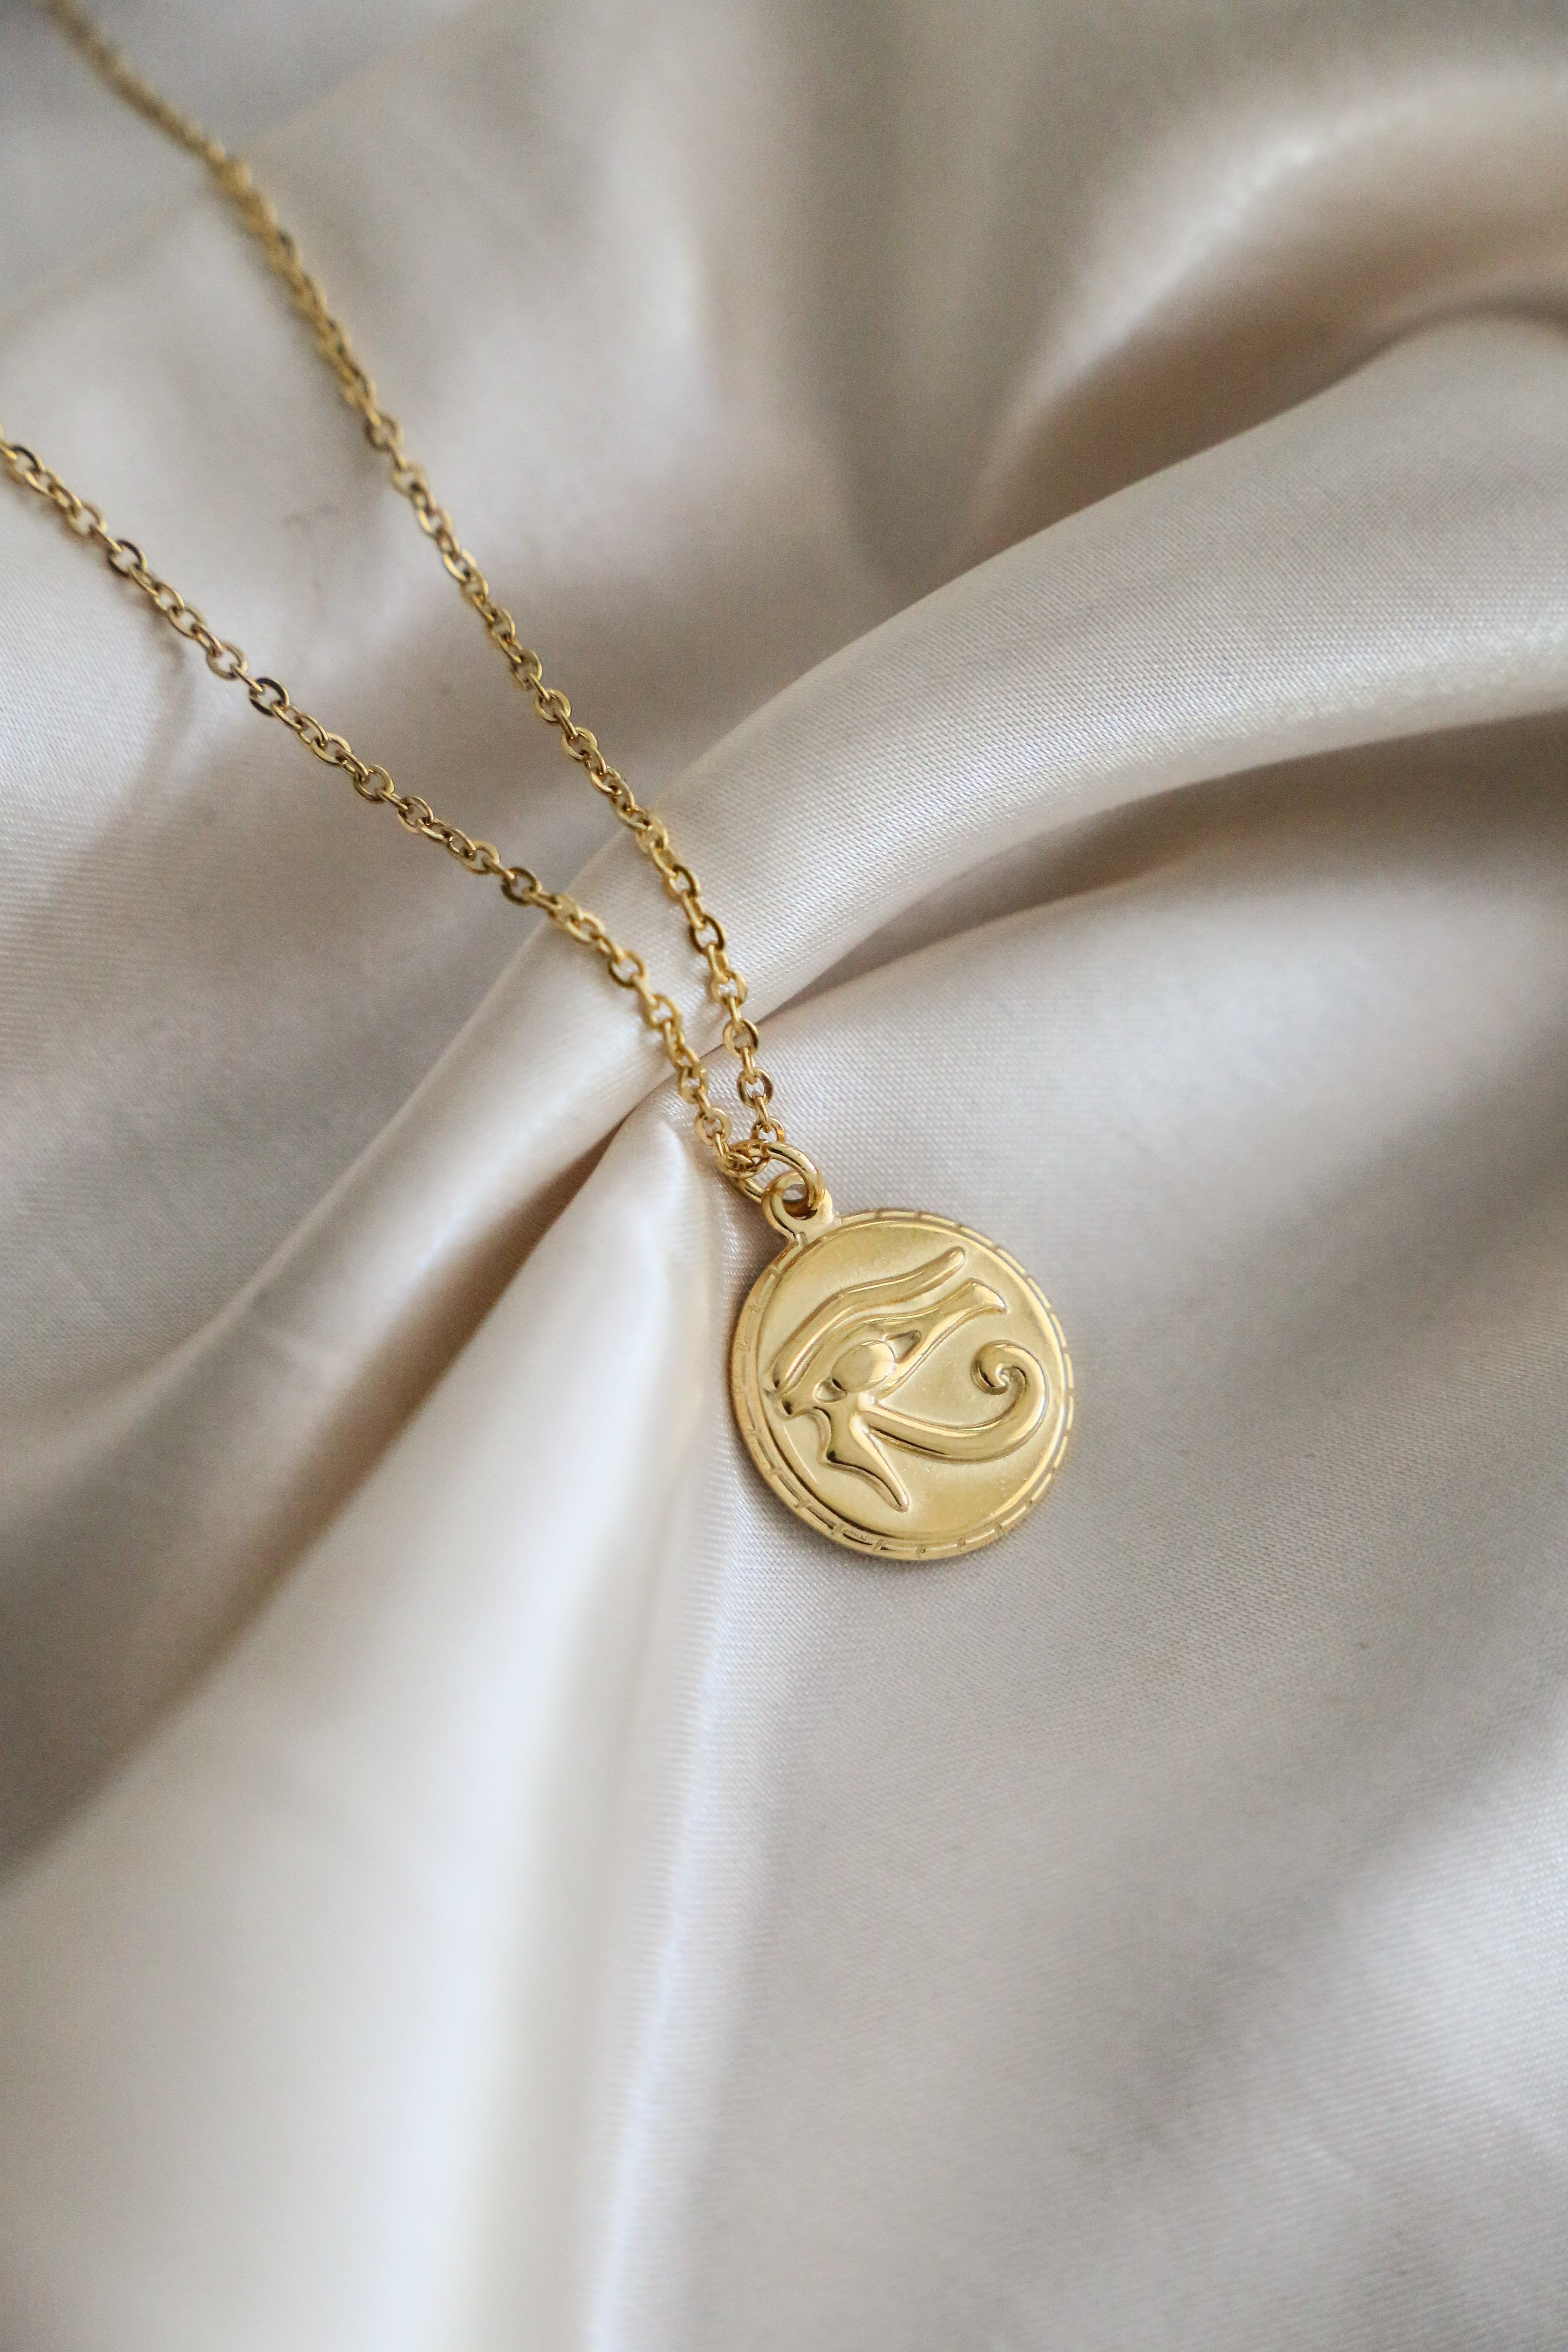 Eye of Horus Necklace - Boutique Minimaliste has waterproof, durable, elegant and vintage inspired jewelry